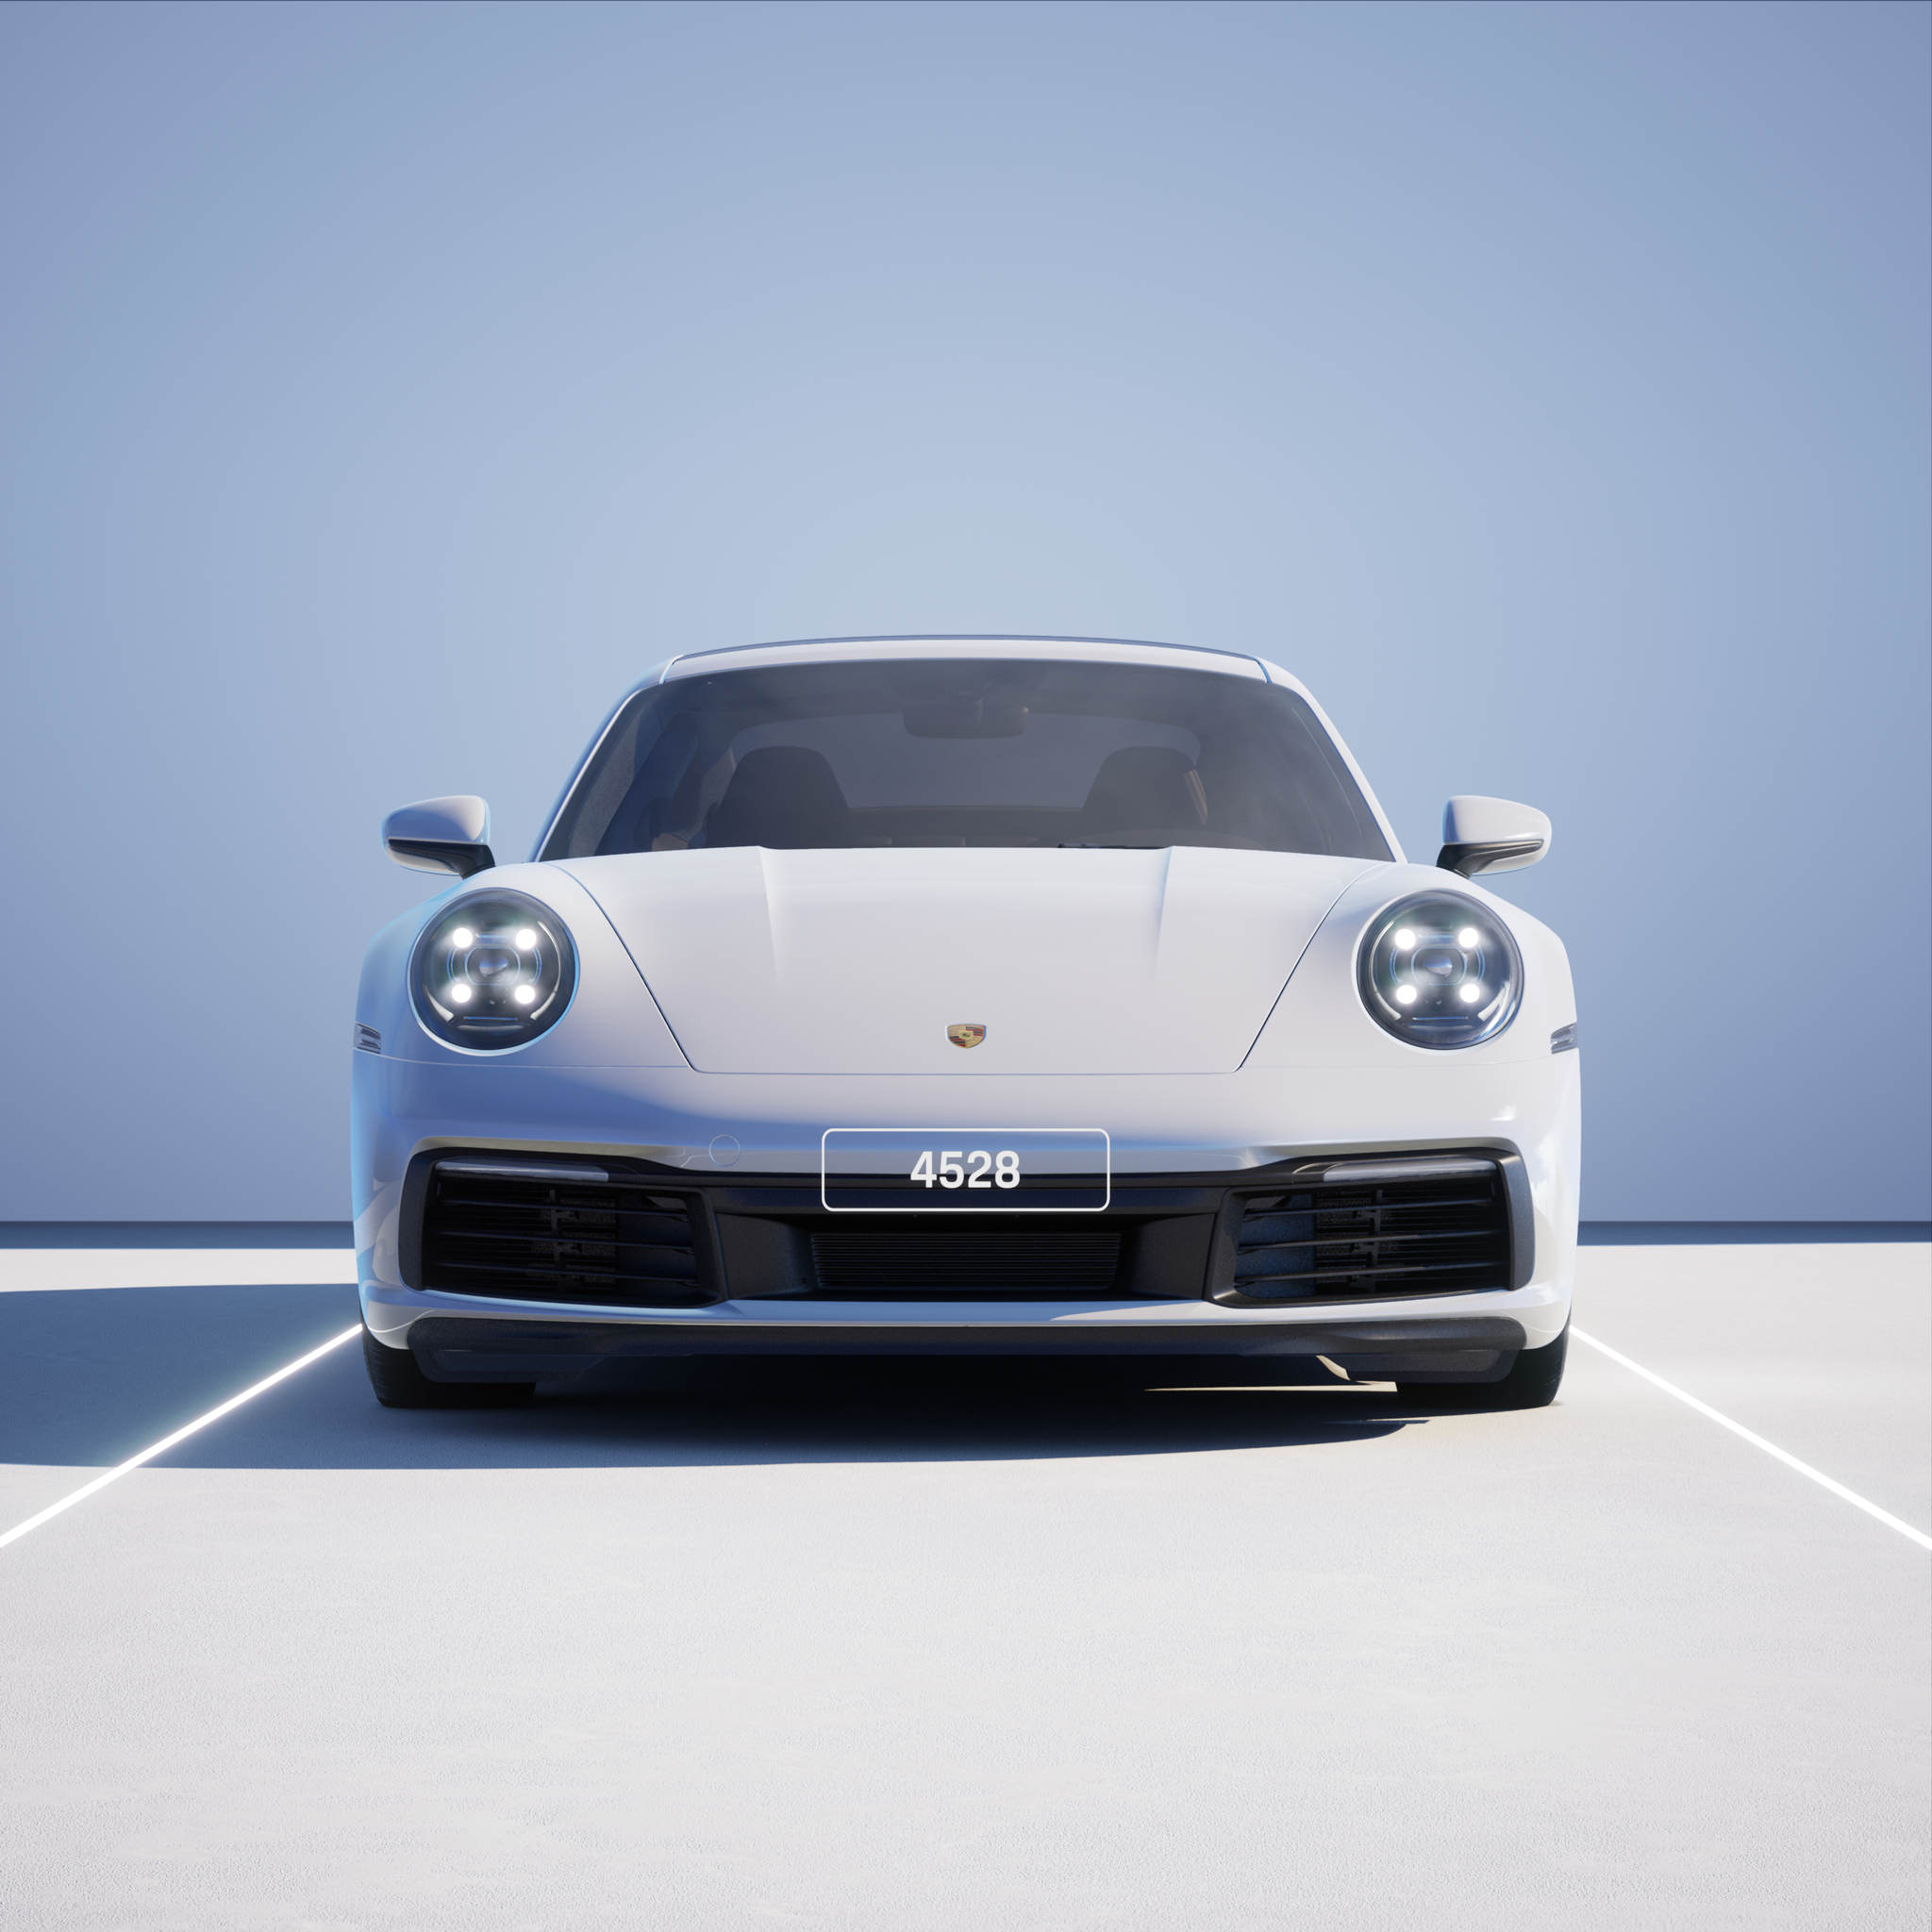 The PORSCHΞ 911 4528 image in phase